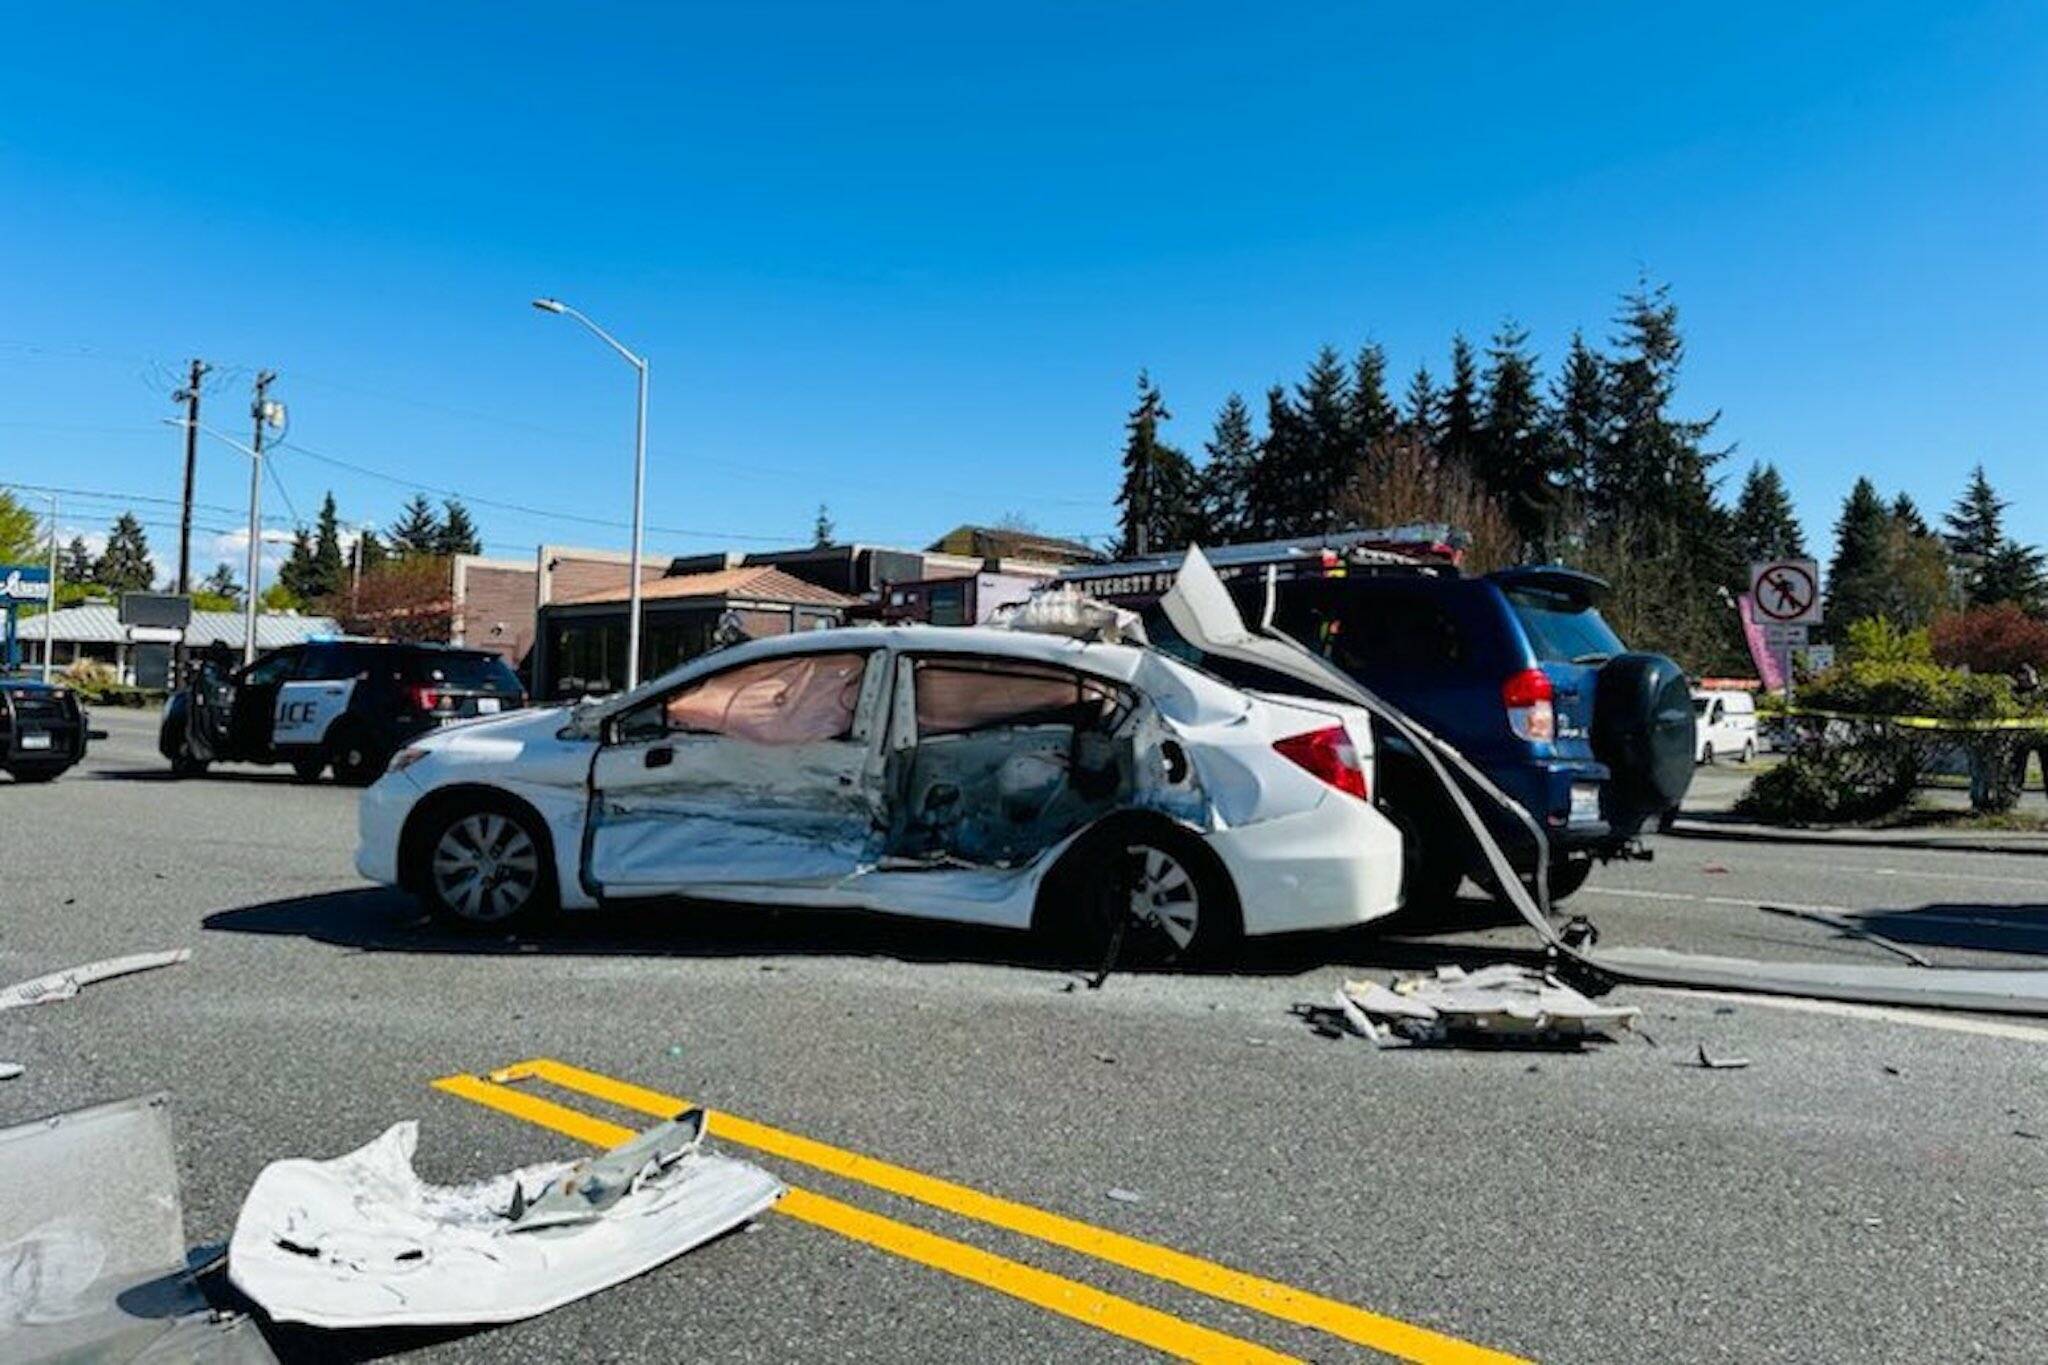 Everett Fire Department and Everett Police on scene of a multiple vehicle collision with injuries in the 1400 block of 41st Street. (Photo provided by Everett Fire Department)